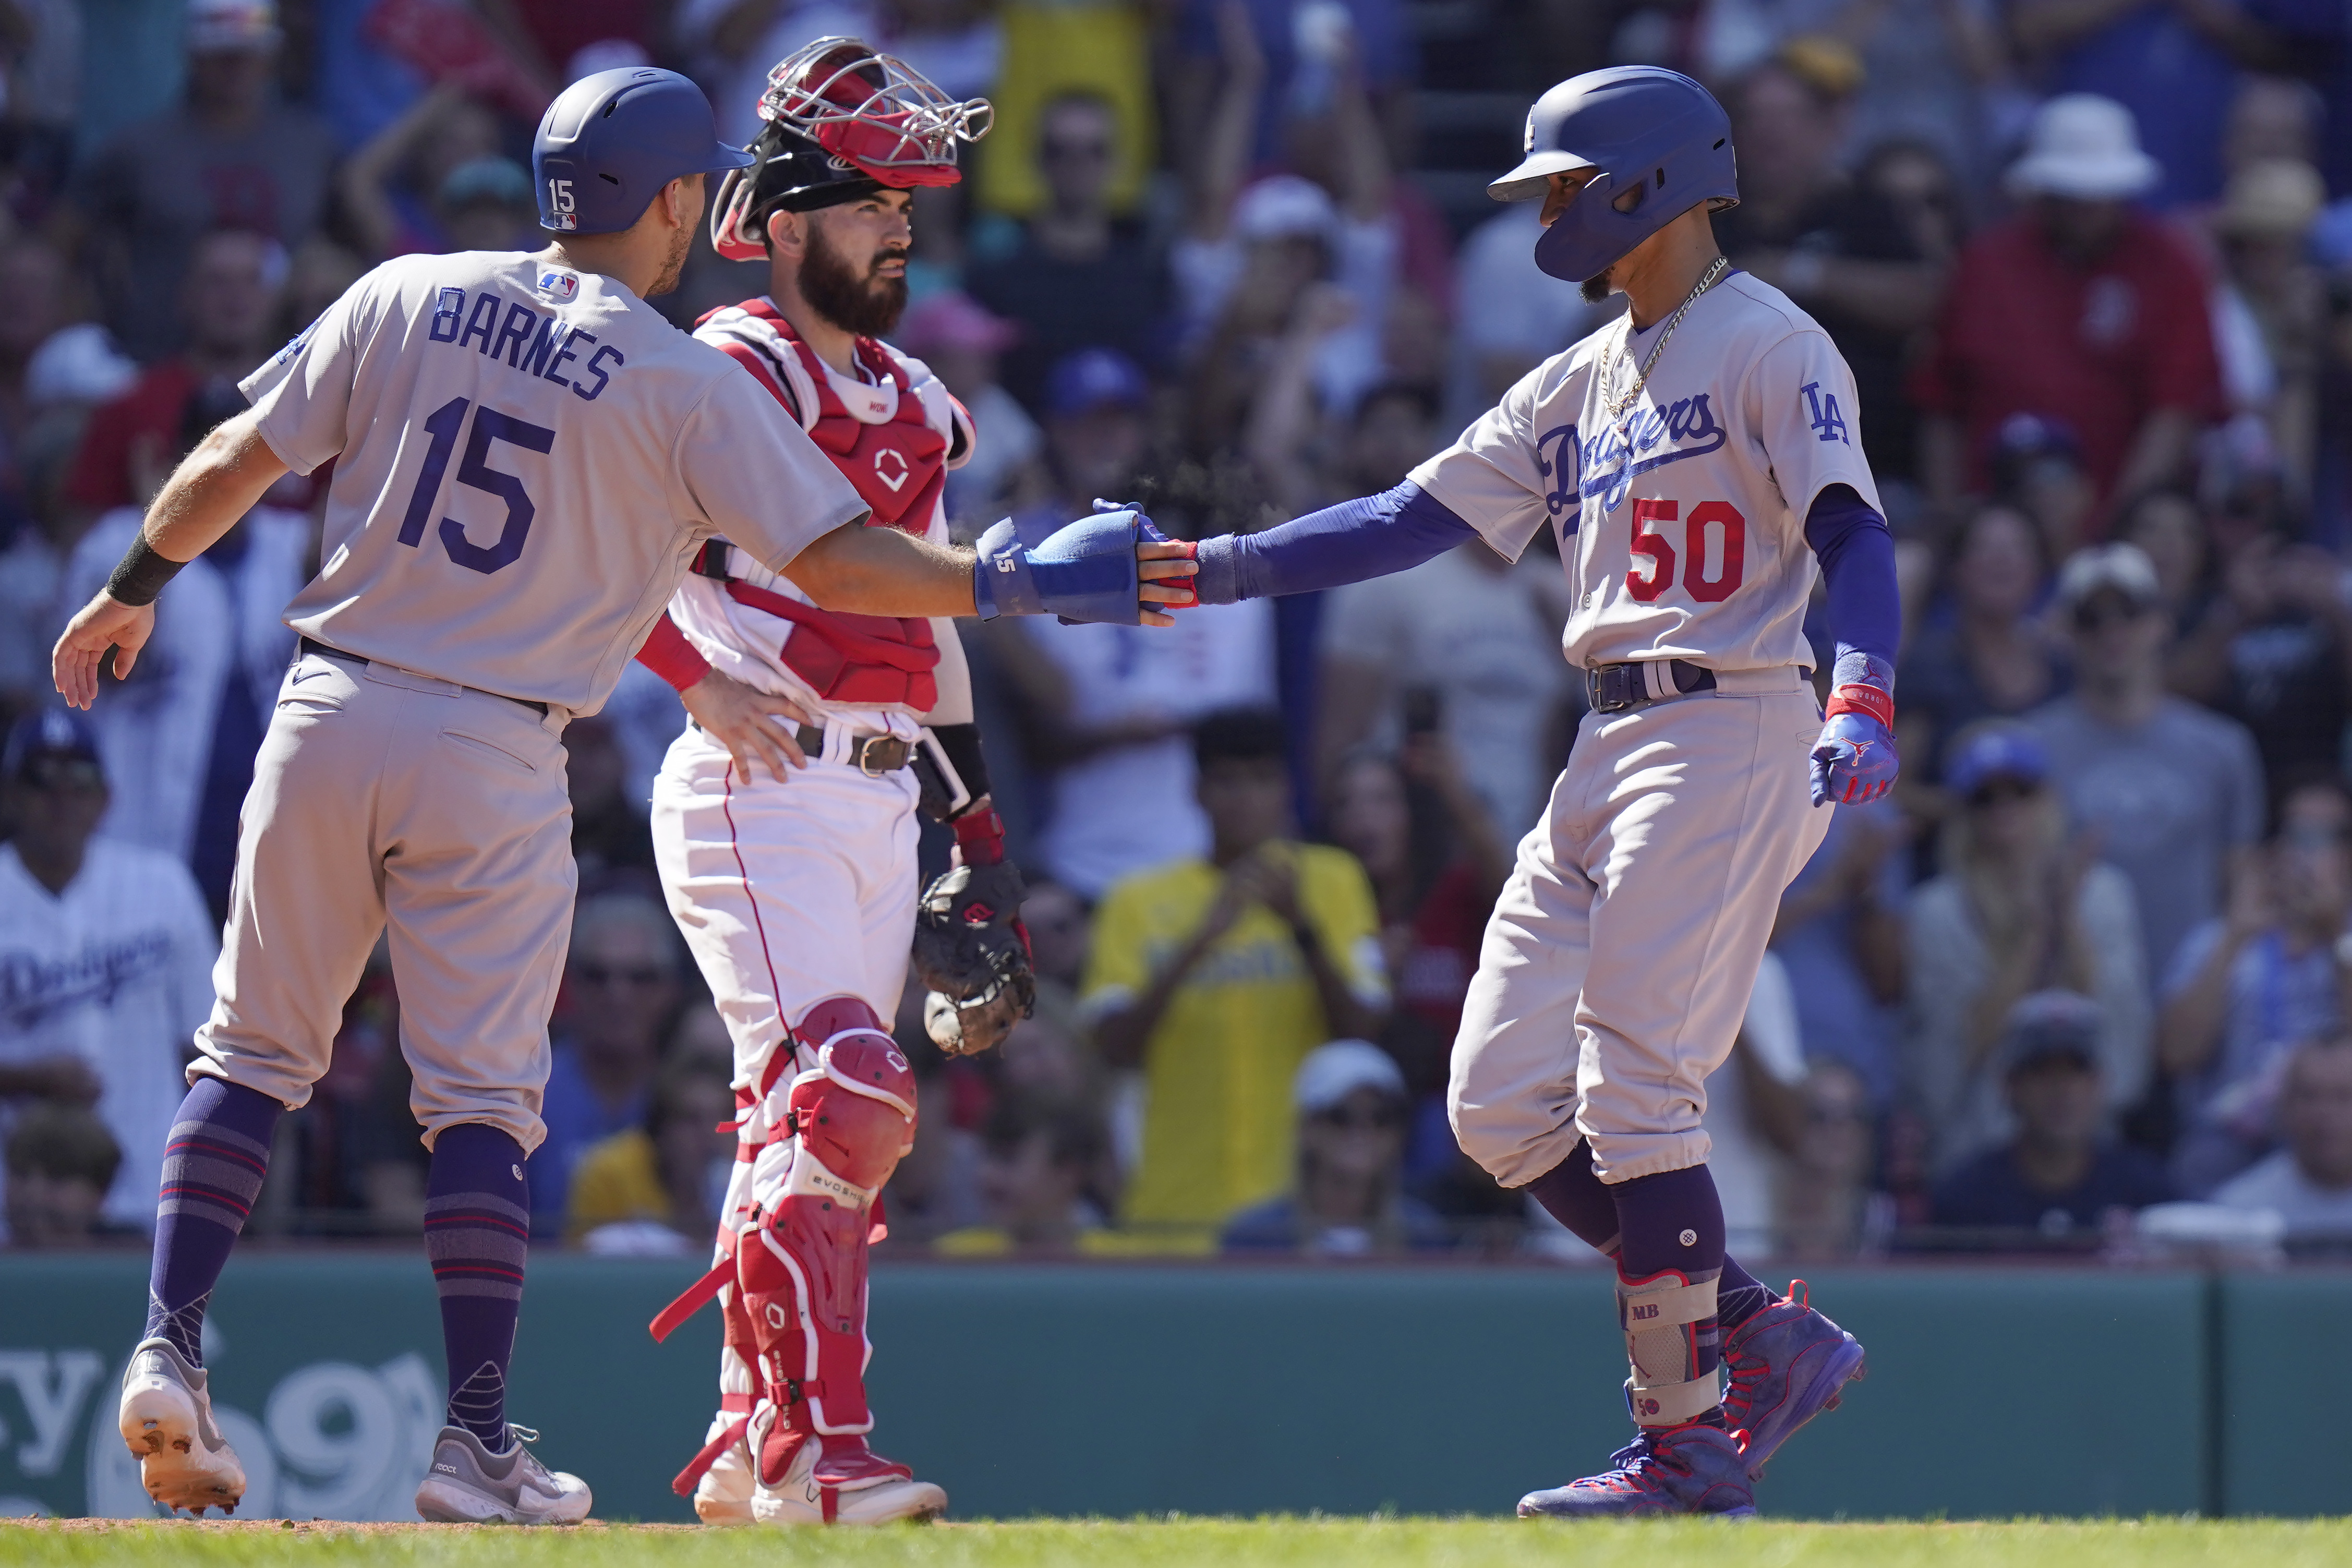 Wong, Verdugo get consecutive RBI doubles, push Red Sox past